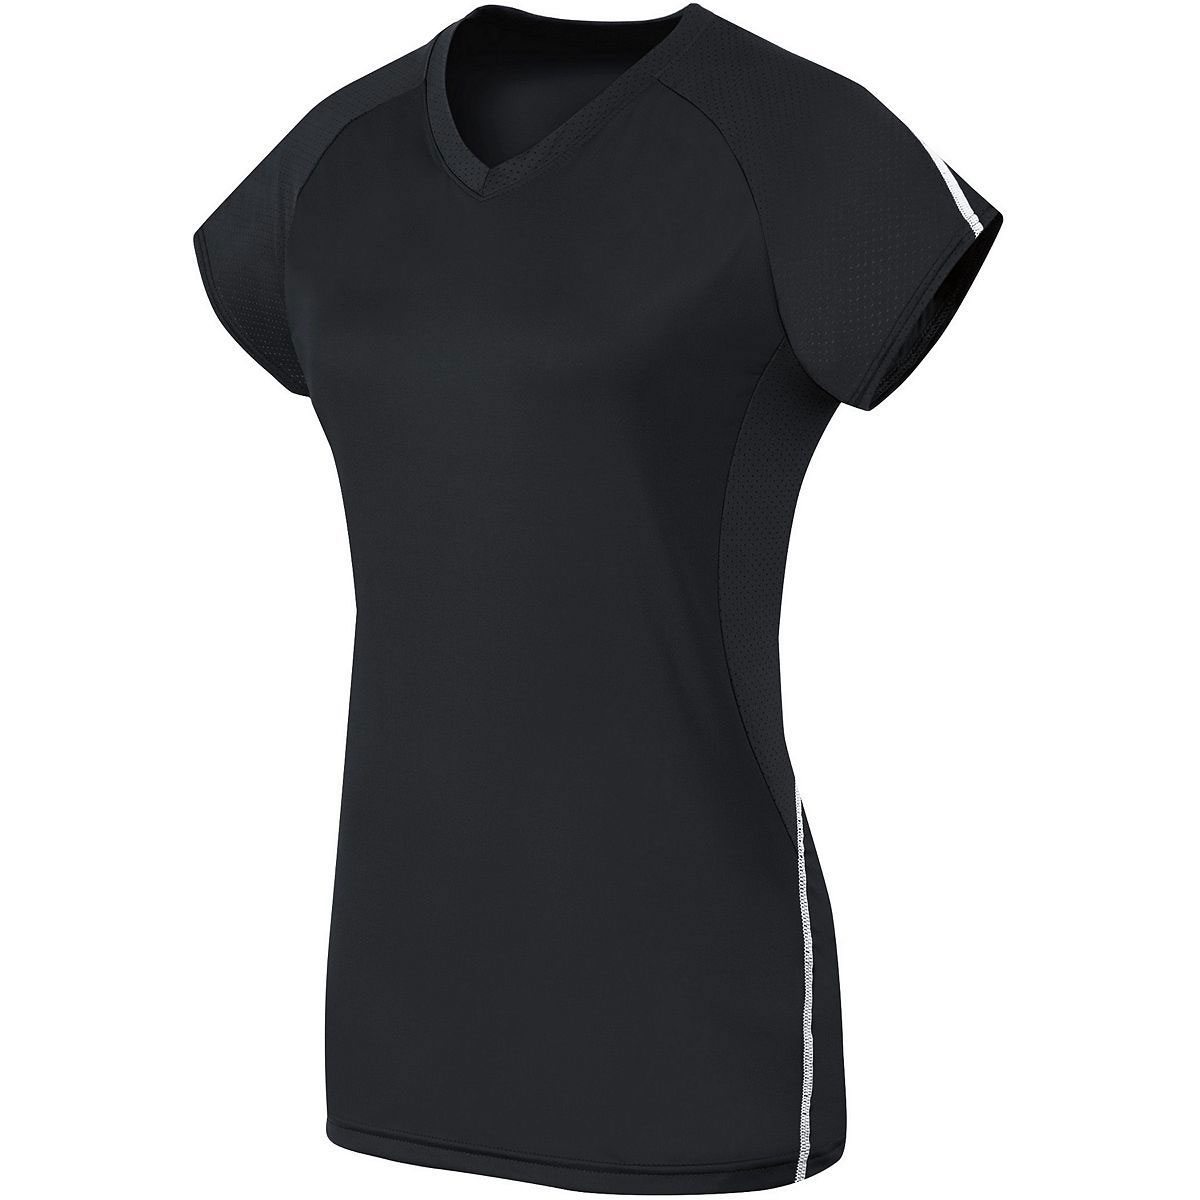 Youth Short Sleeve Solid Jersey - Black | Midwest Volleyball Warehouse